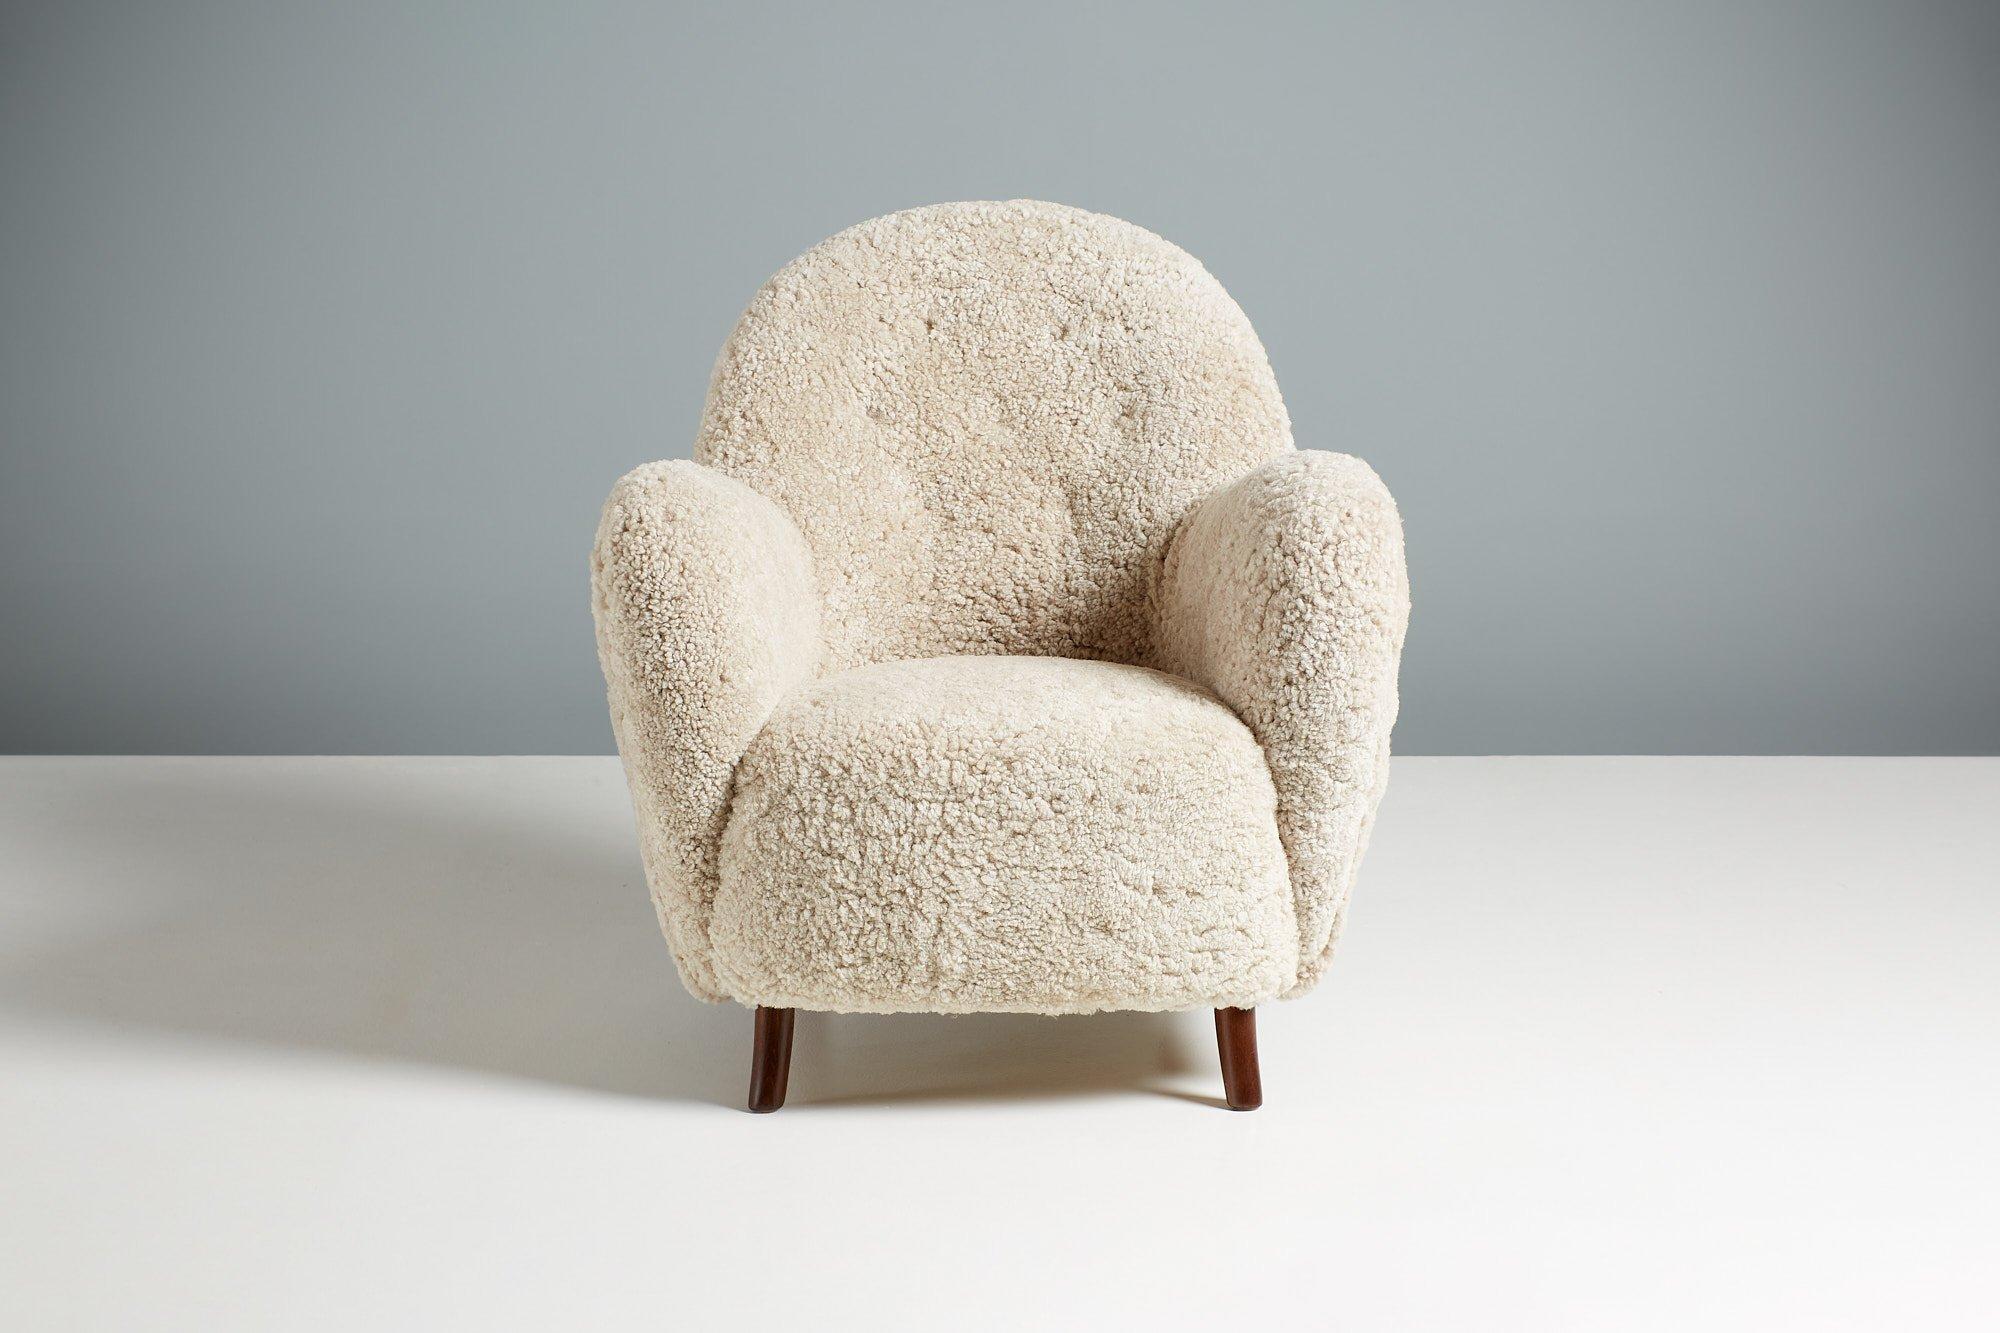 Georg Kofoed Sheepskin Lounge chair, circa 1940s.

Rarely seen and highly sought-after lounge chair from Danish master-cabinetmaker George Kofoed. The chair dates from the early 1940s and features wonderfully curvaceous arms and back. The chair has